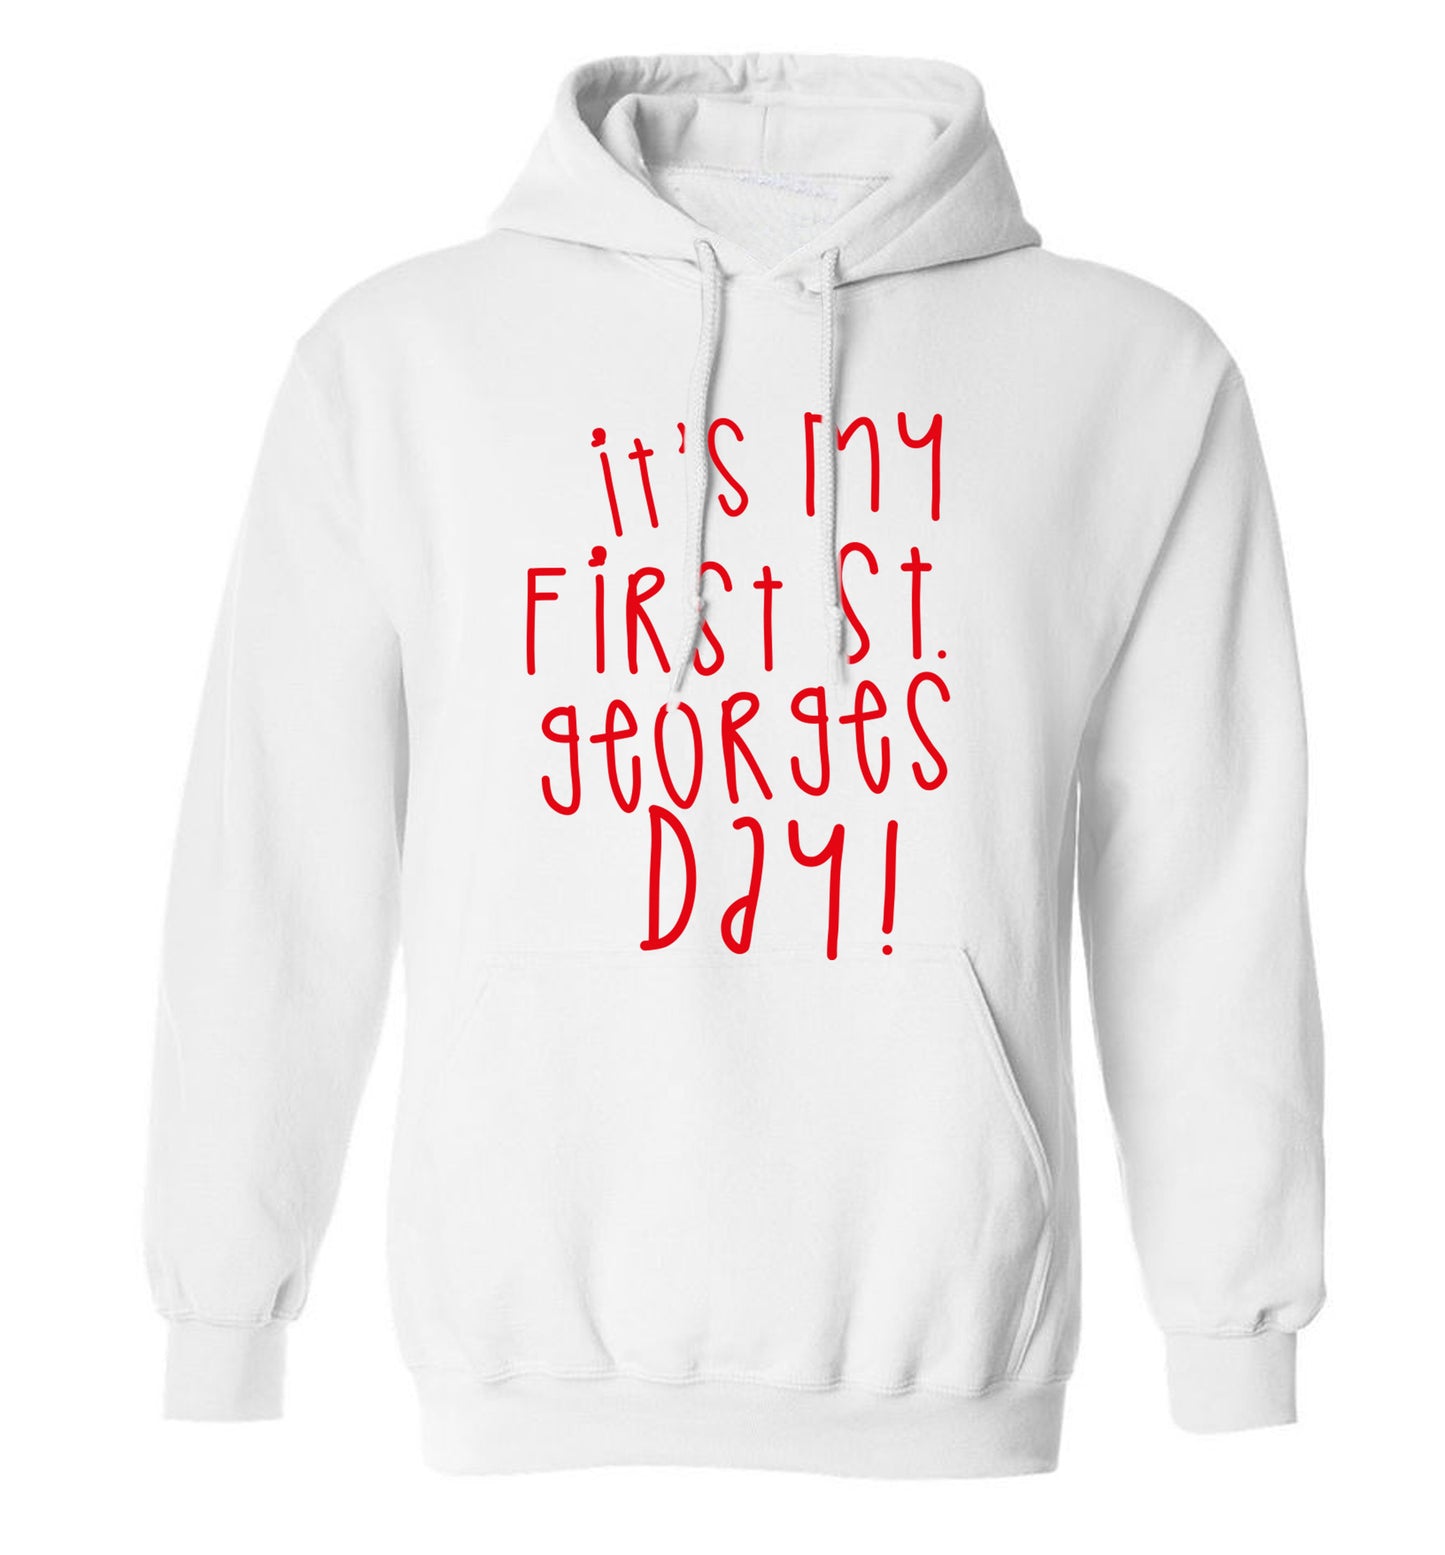 It's my first St Georges day adults unisex white hoodie 2XL